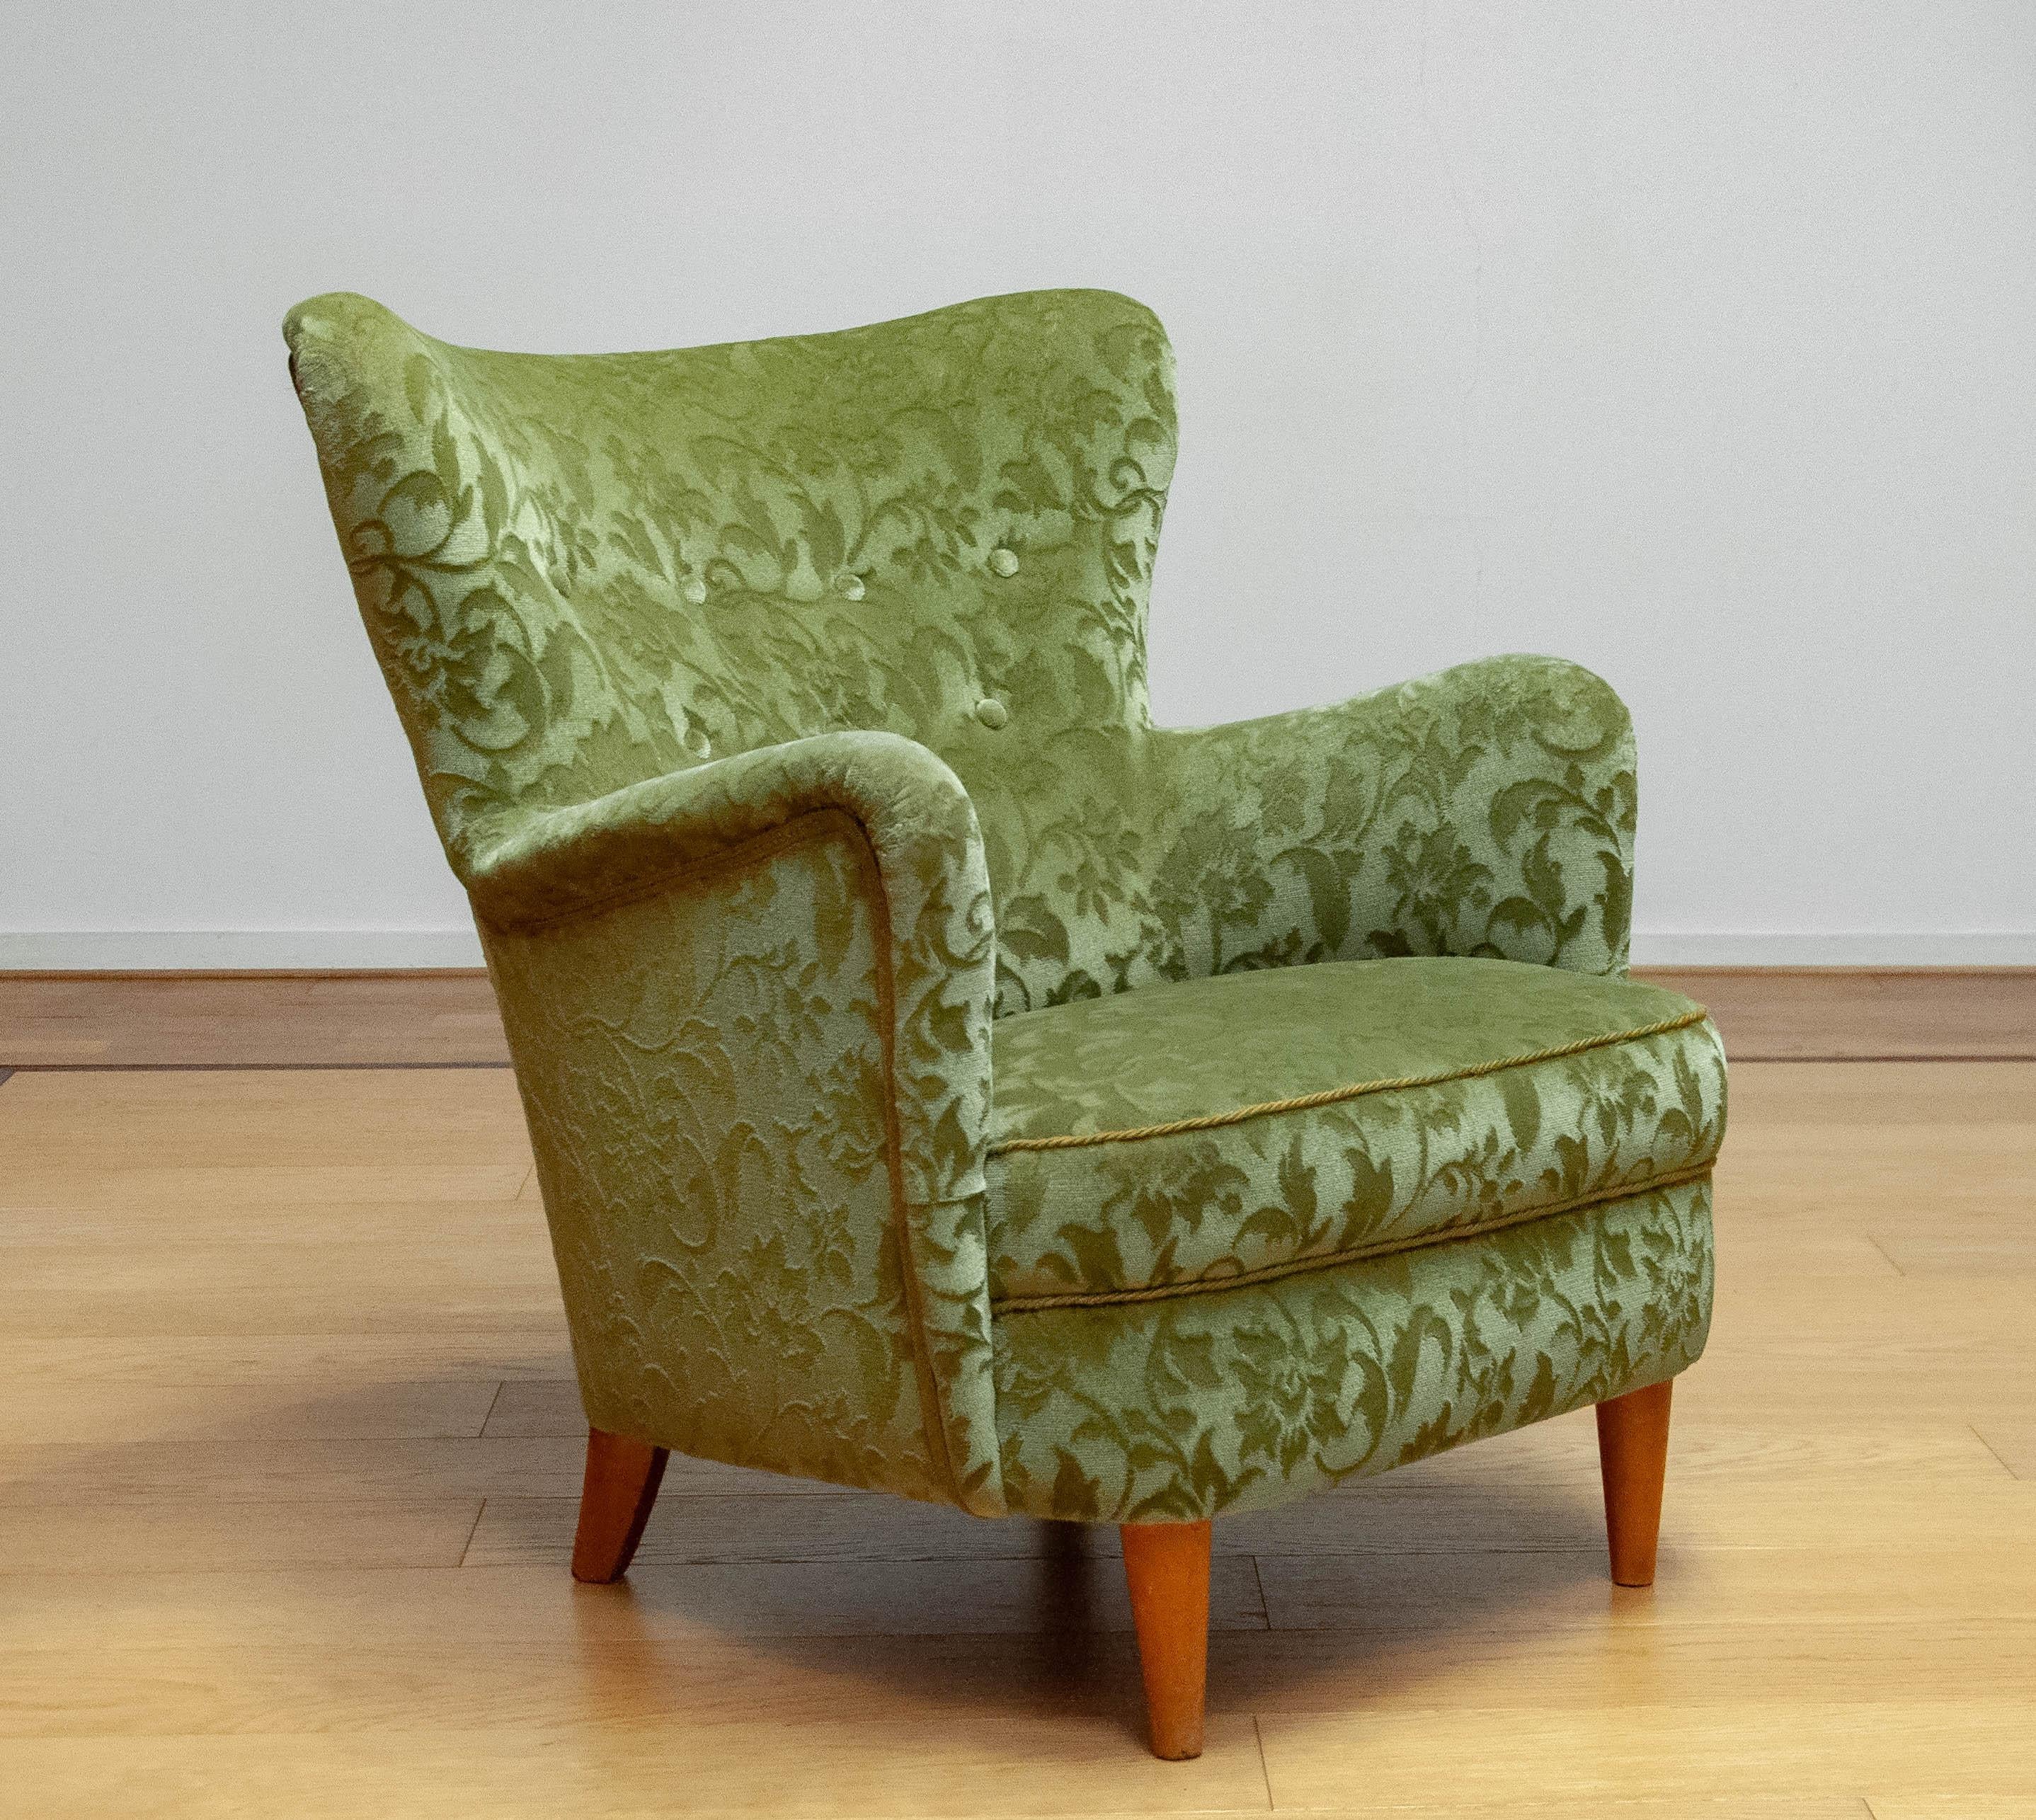 Beautiful wingback chair, model 'Laila' designed by Ilmari Lappalainen for Asko Finland in the 1950s.
The chair is in overal good condition. Supports and sits very good.
Reupholstered with the current green ton sur ton velvet in the 1970s.
The